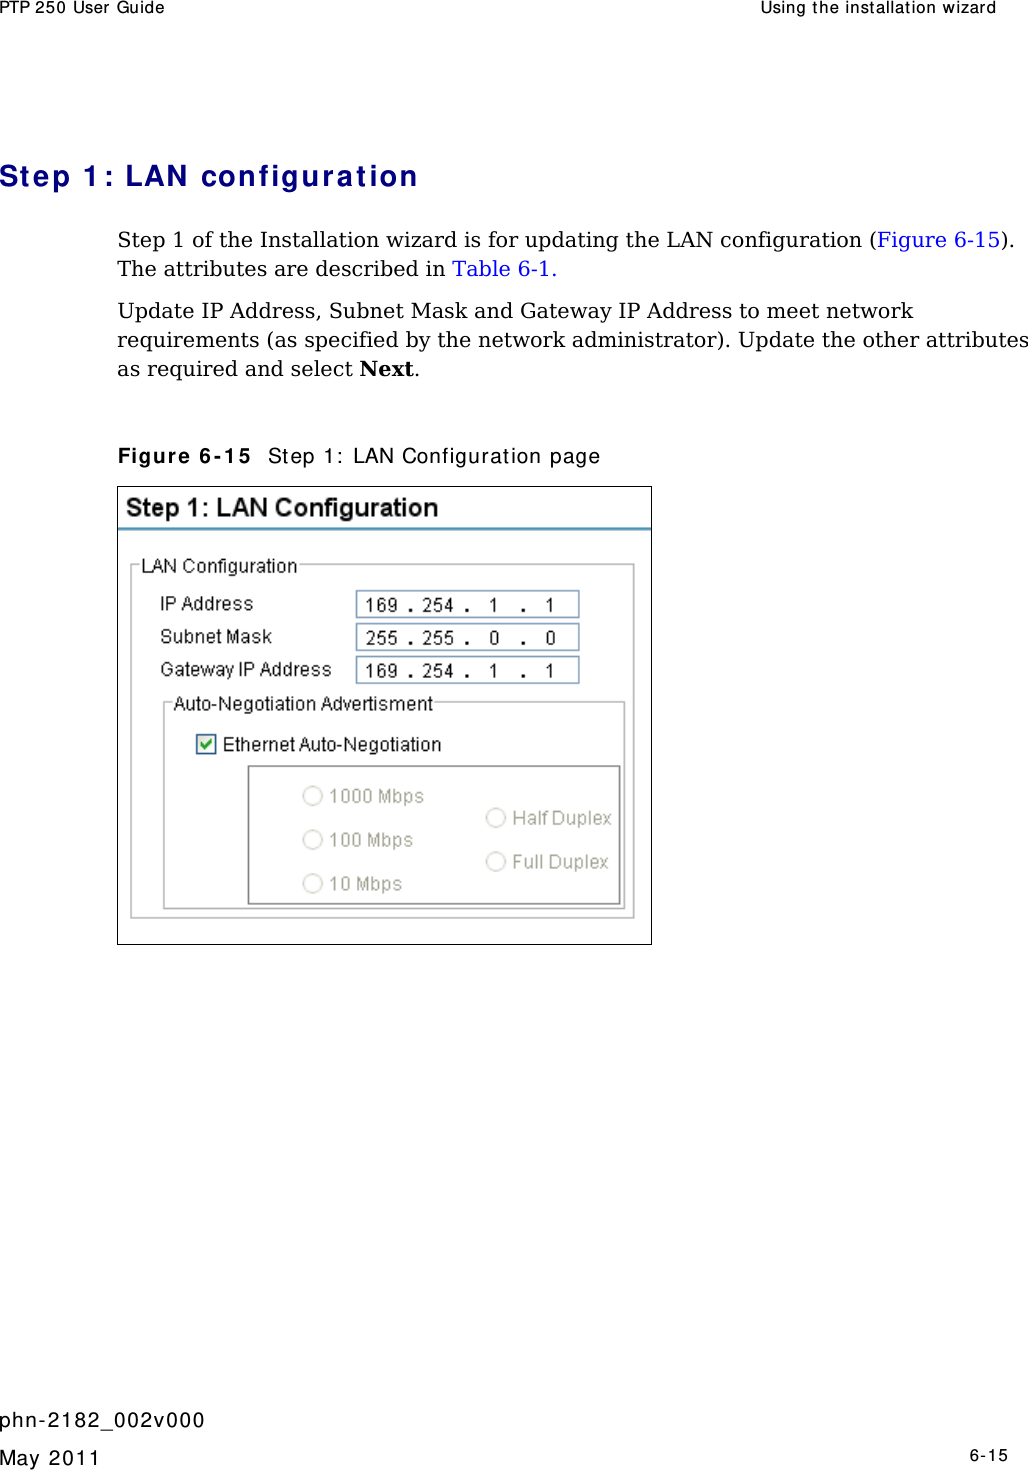 PTP 250 User Guide  Using the inst allation wizar d   phn- 2182_002v000   May 2011   6-15  Step 1 : LAN  configurat ion Step 1 of the Installation wizard is for updating the LAN configuration (Figure 6-15). The attributes are described in Table 6-1.  Update IP Address, Subnet Mask and Gateway IP Address to meet network requirements (as specified by the network administrator). Update the other attributes as required and select Next.  Figure 6 - 1 5   St ep 1:  LAN Configuration page  